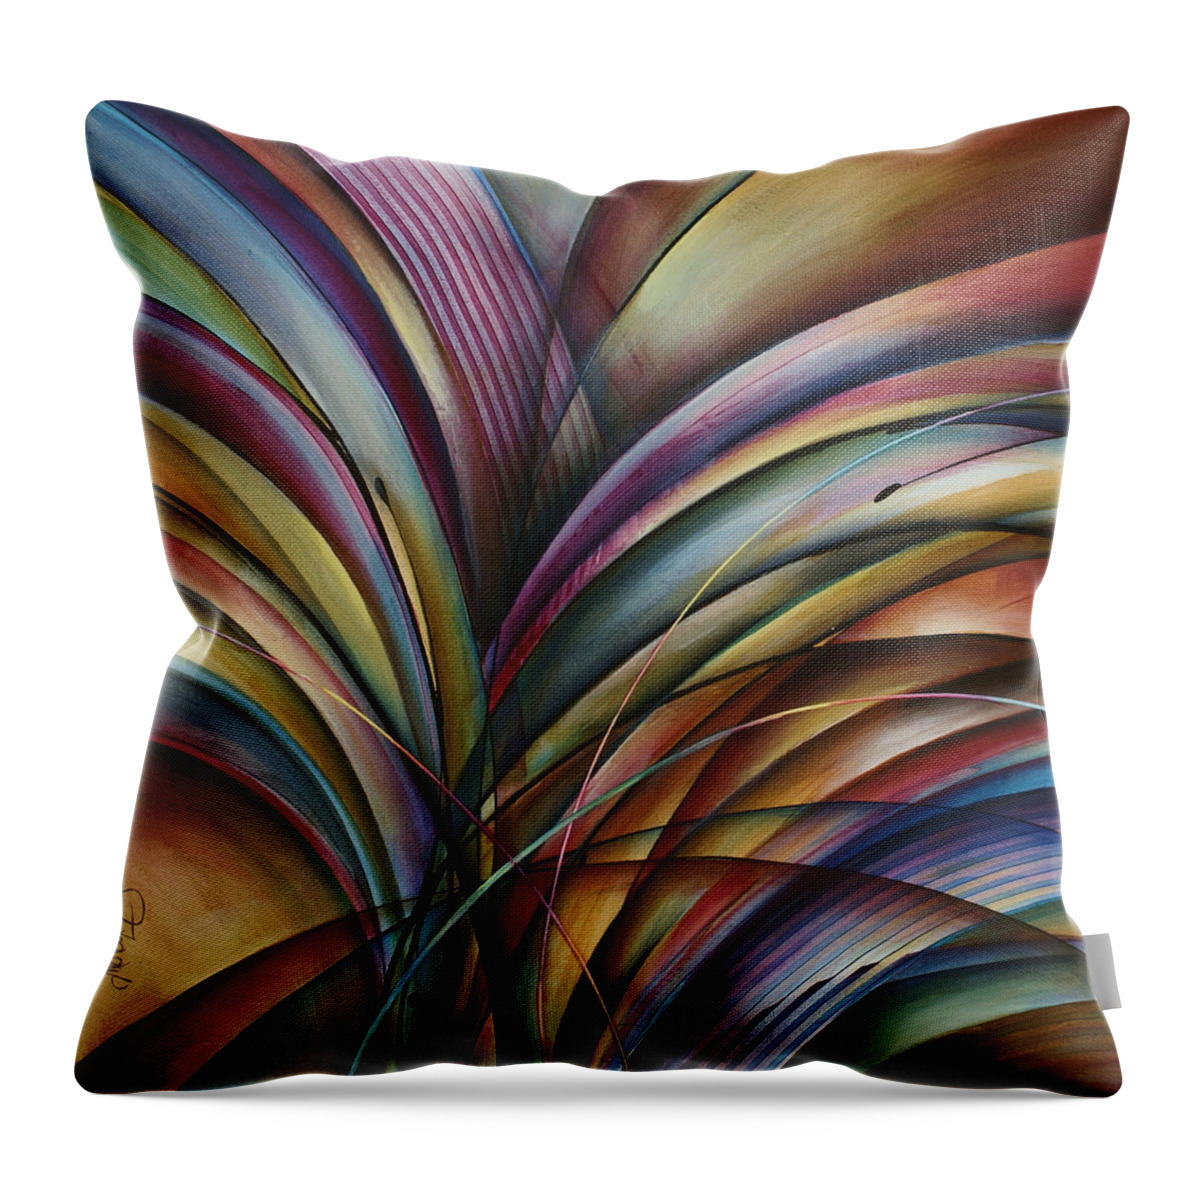 Abstract Design Throw Pillow featuring the painting Untitled 1 by Michael Lang